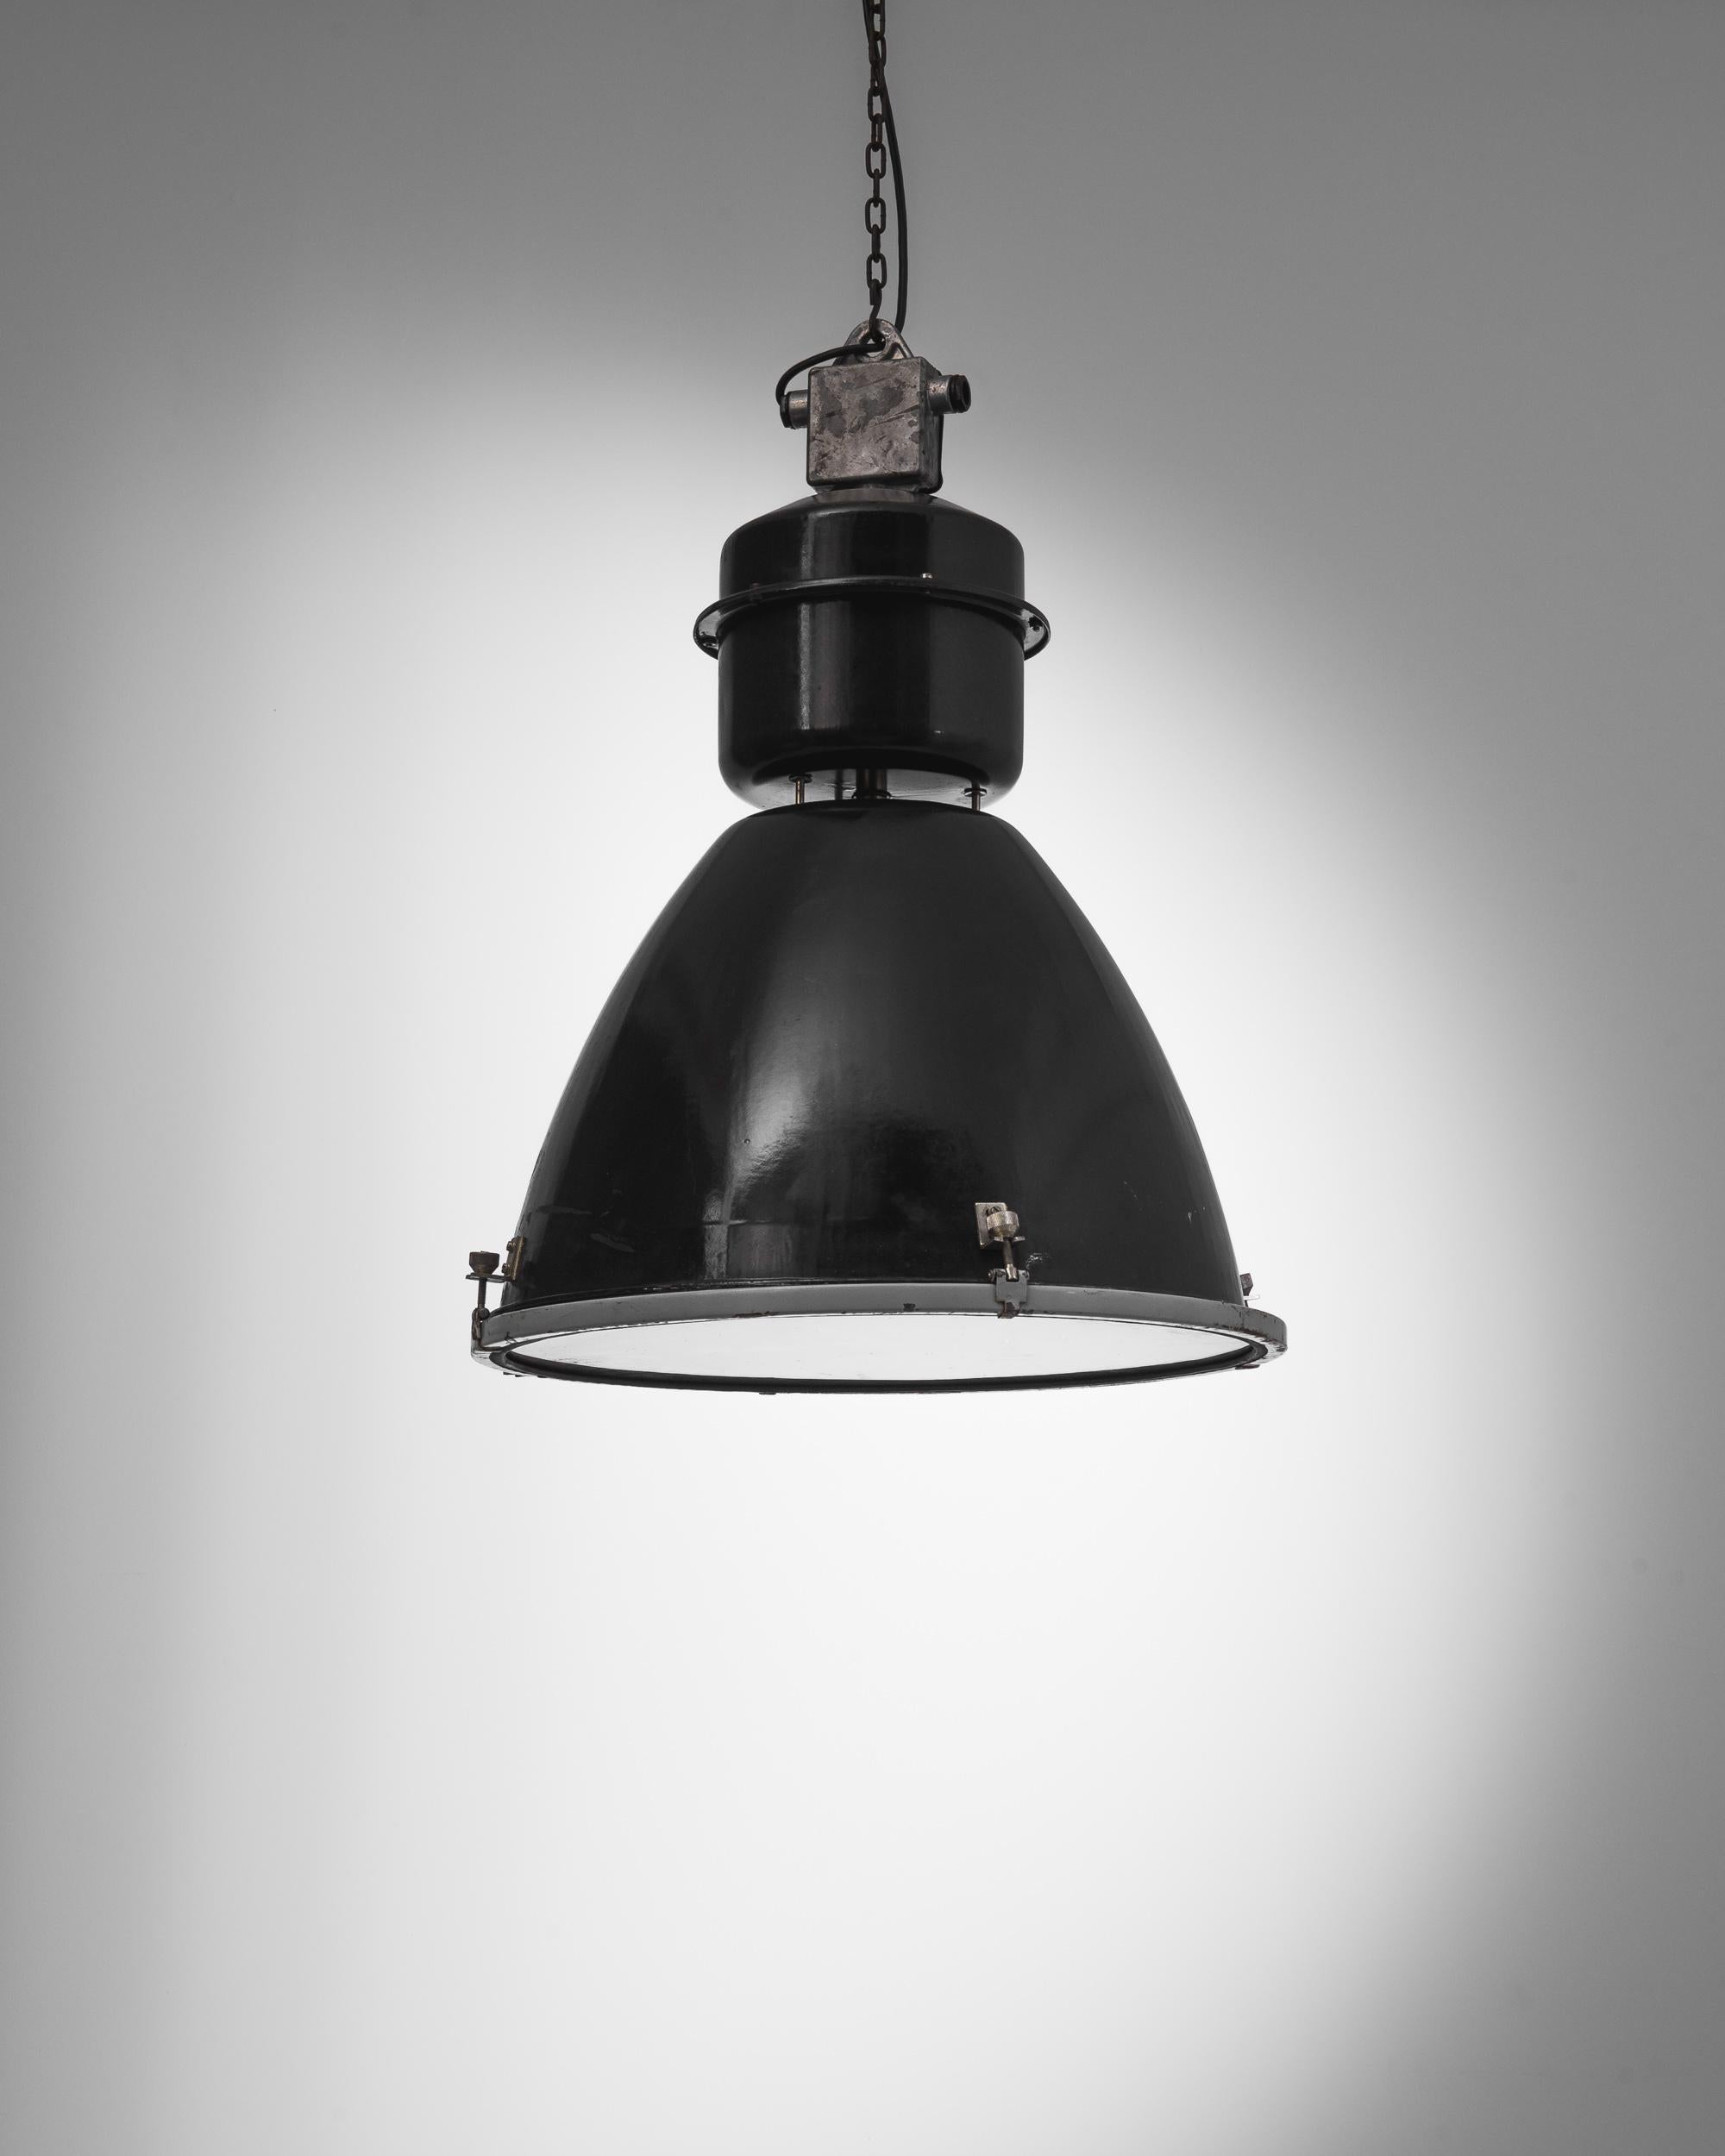 Bare essential lighting from the mid-20th century. Used in industry and lifted up by design champions like Le Corbusier. Originally designed to serve the purposes of industry, durable metal and robust construction also satisfy our desire for a